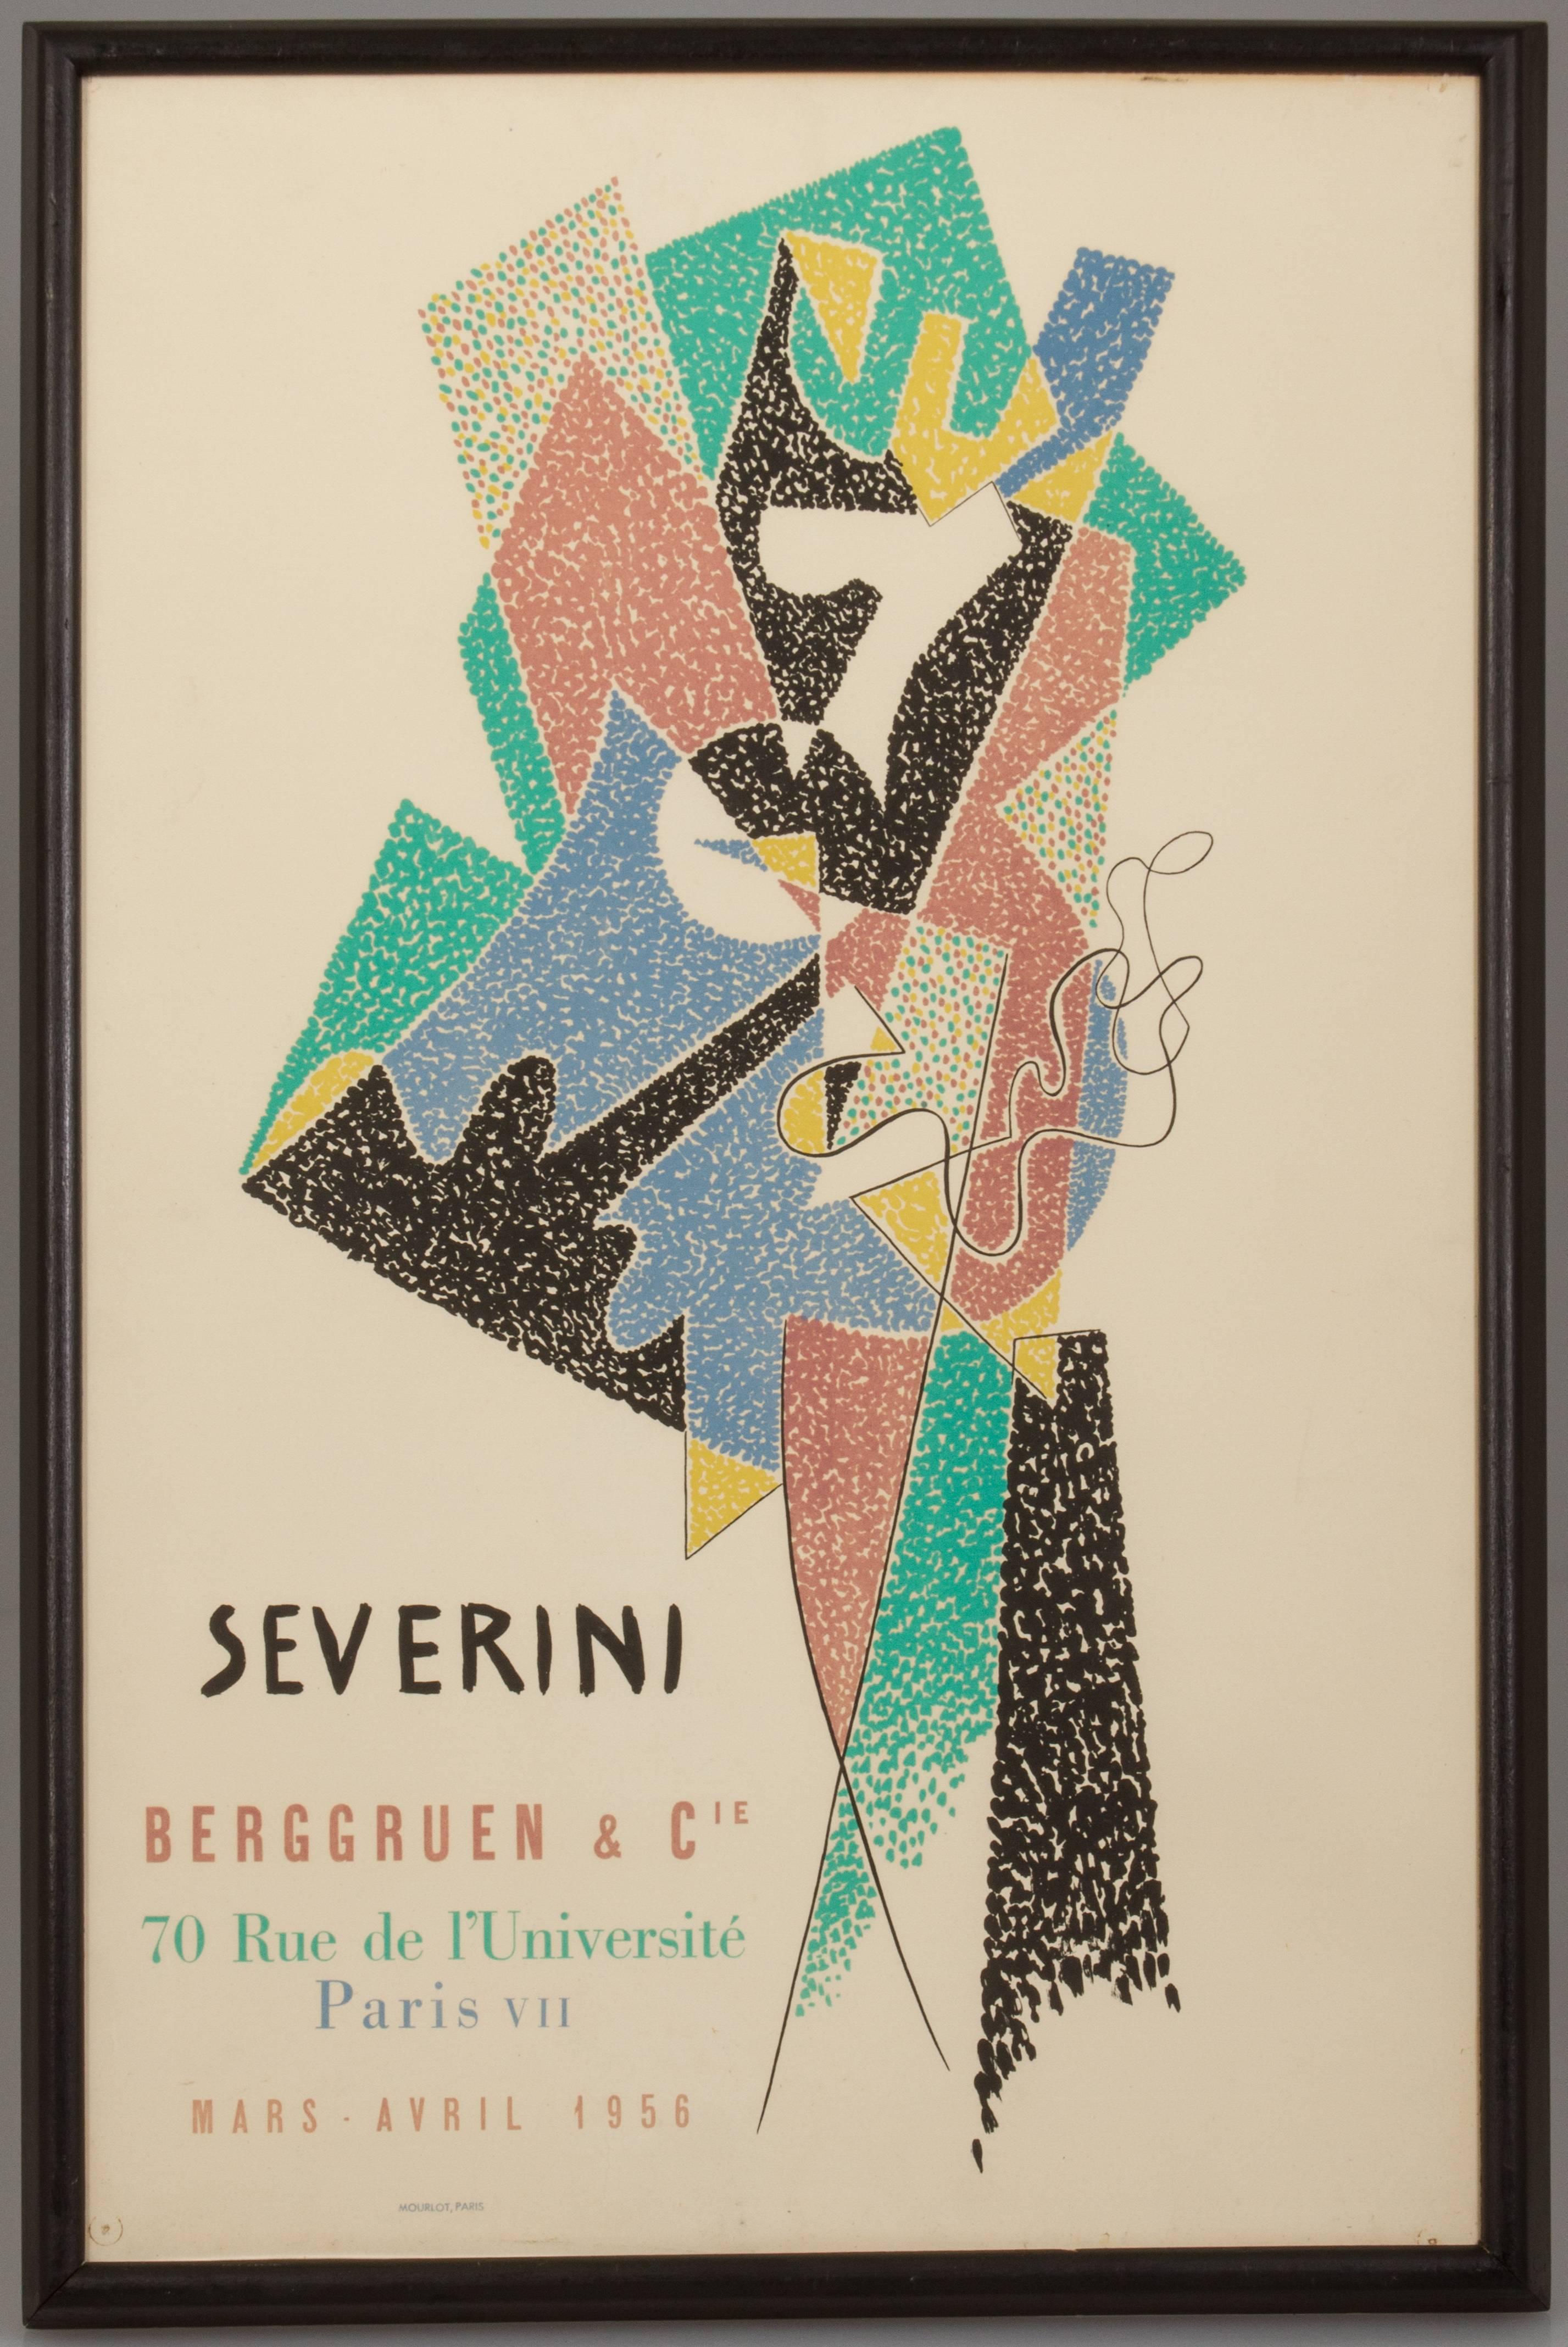 Printed in 1956 by Mourlot, this was for Severini's exhibition at the Galerie Bergguen & Cie.